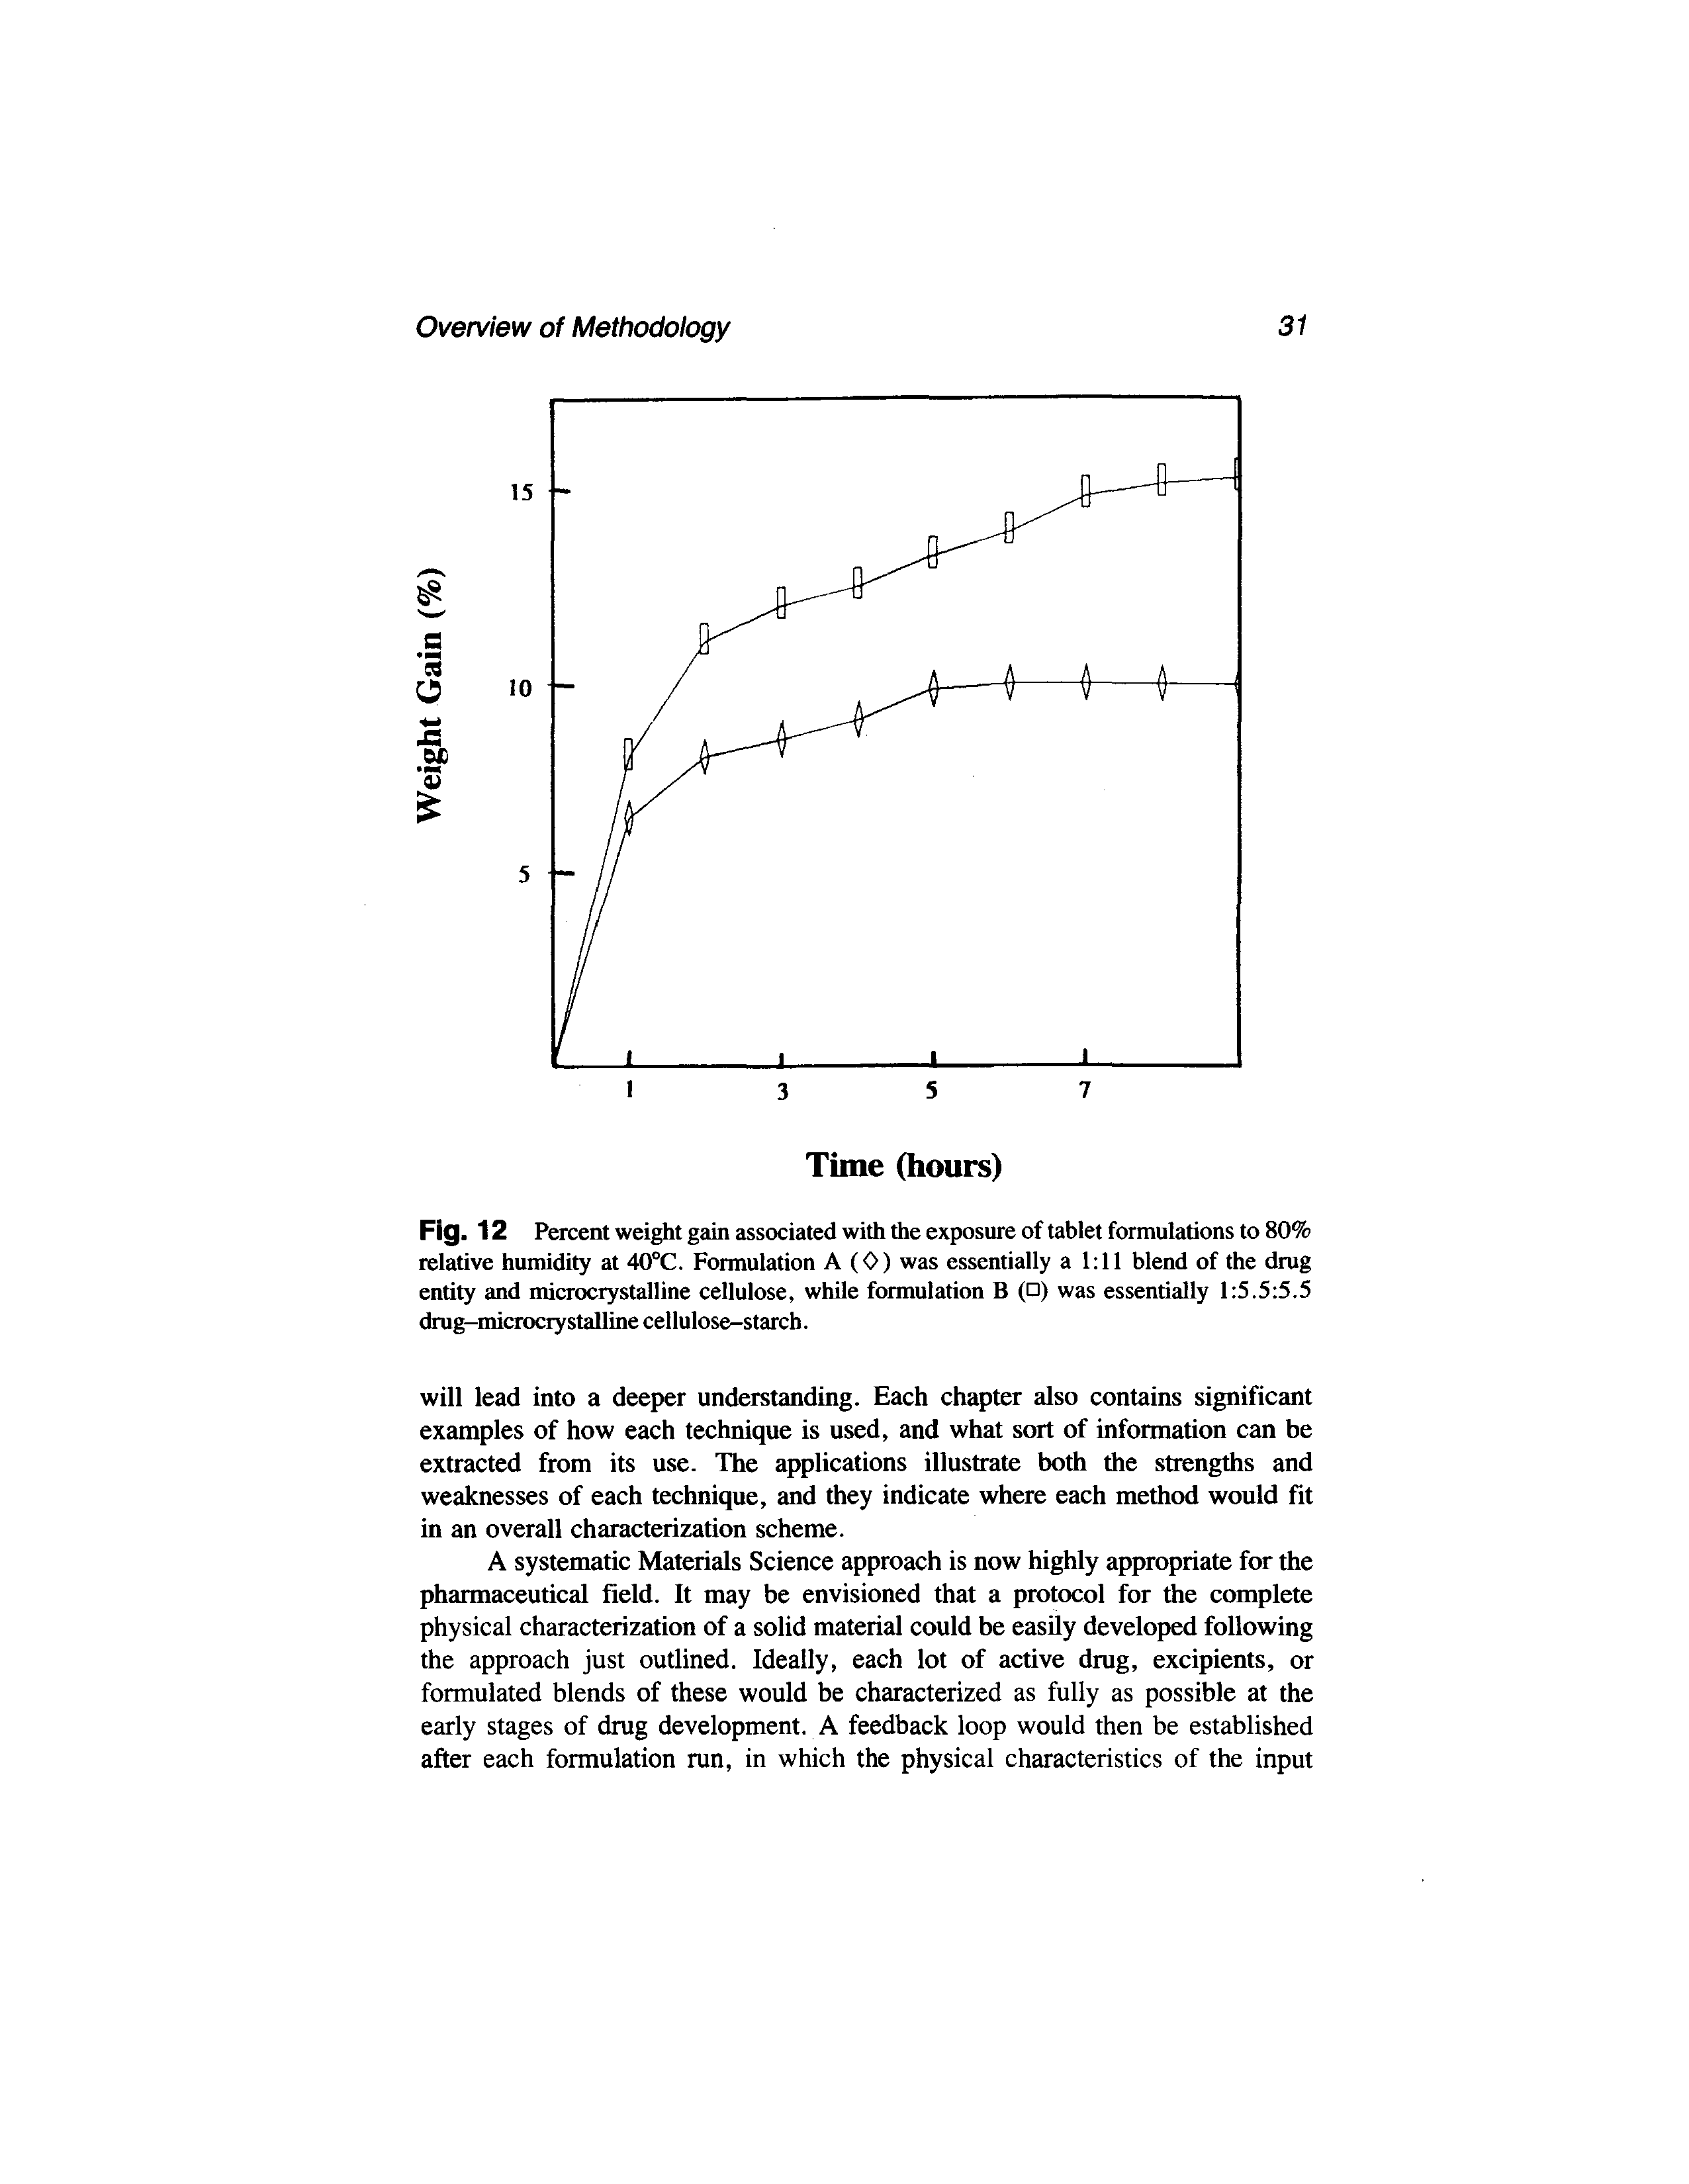 Fig. 12 Percent weight gain associated with the exposure of tablet formulations to 80% relative humidity at 40°C. Formulation A (0) was essentially a 1 11 blend of the drug entity and microcrystalline cellulose, while formulation B ( ) was essentially 1 5.5 5.5 drug-microcrystalline cellulose-starch.